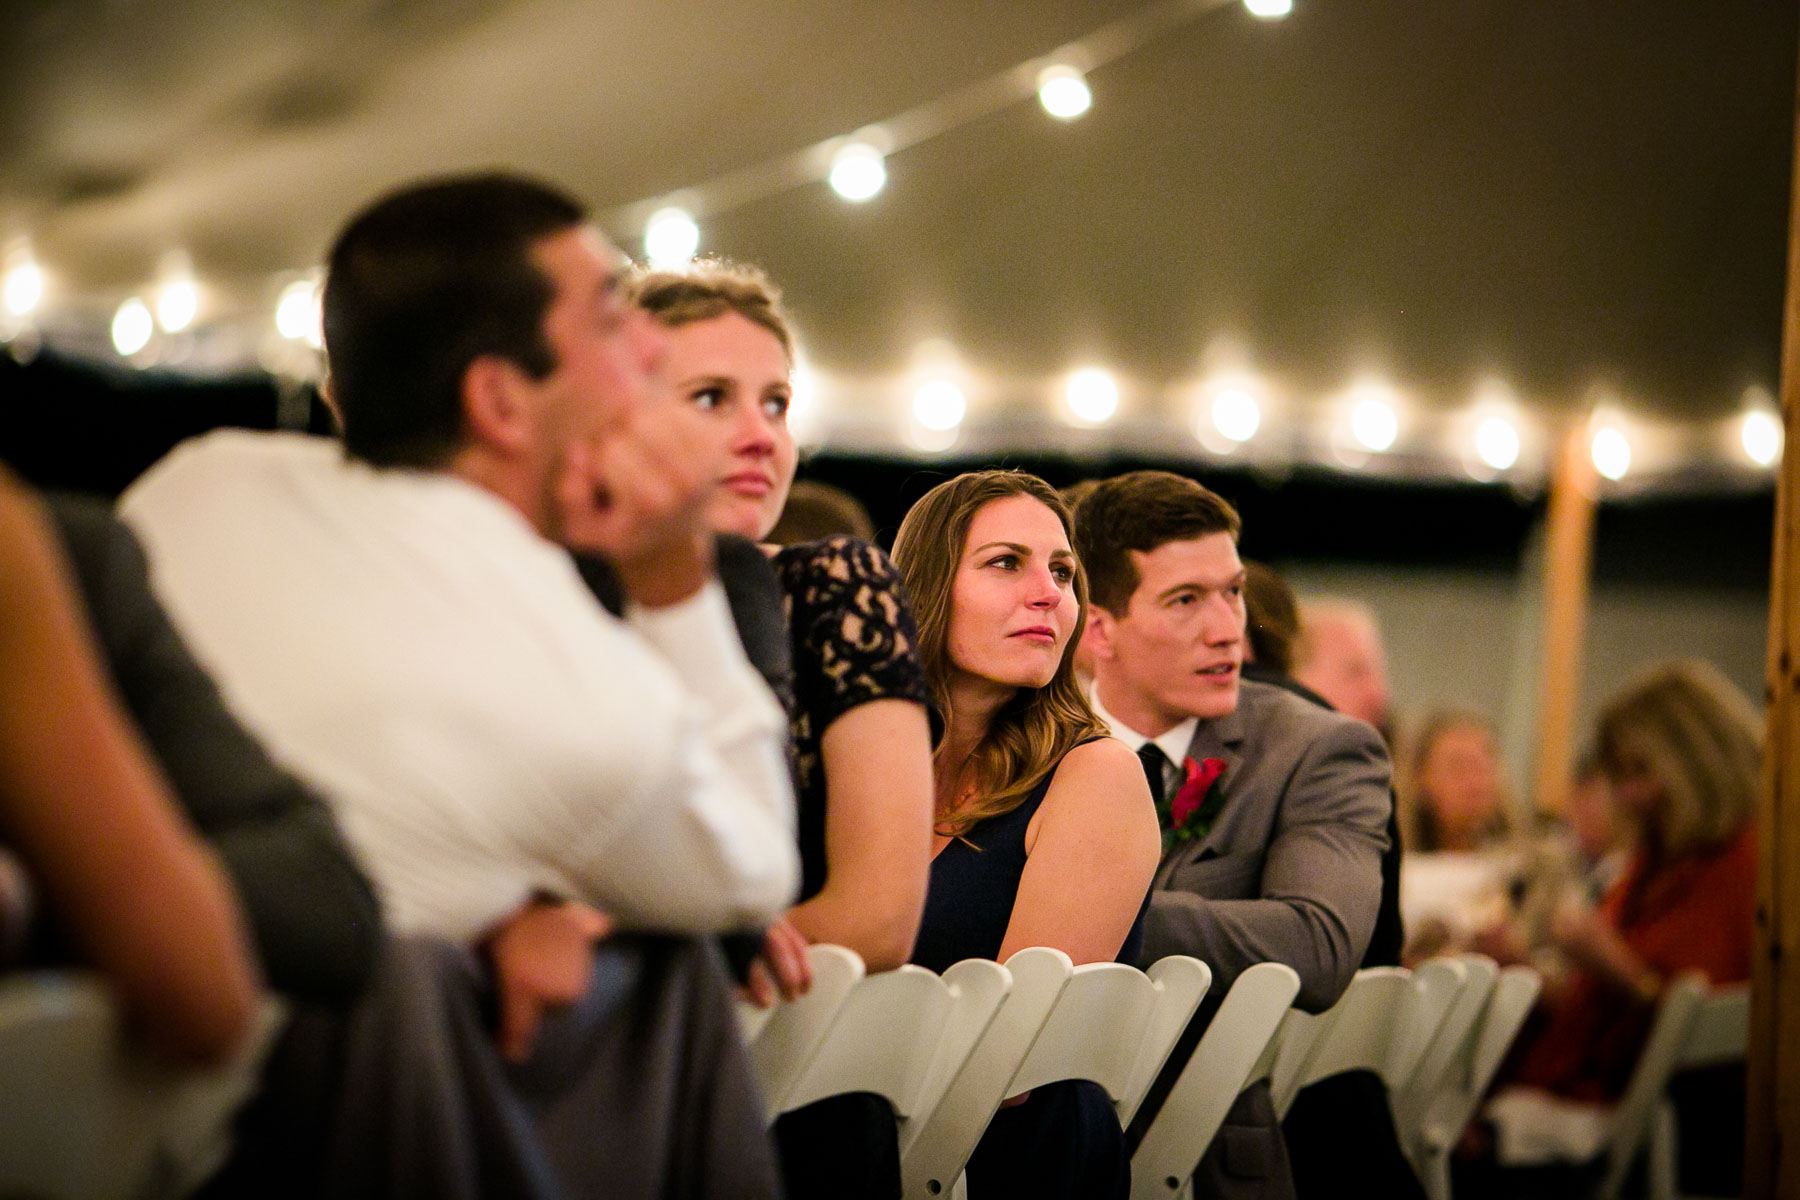 The_Connors_Center_Wedding_Dan_Aguirre_Photography_100